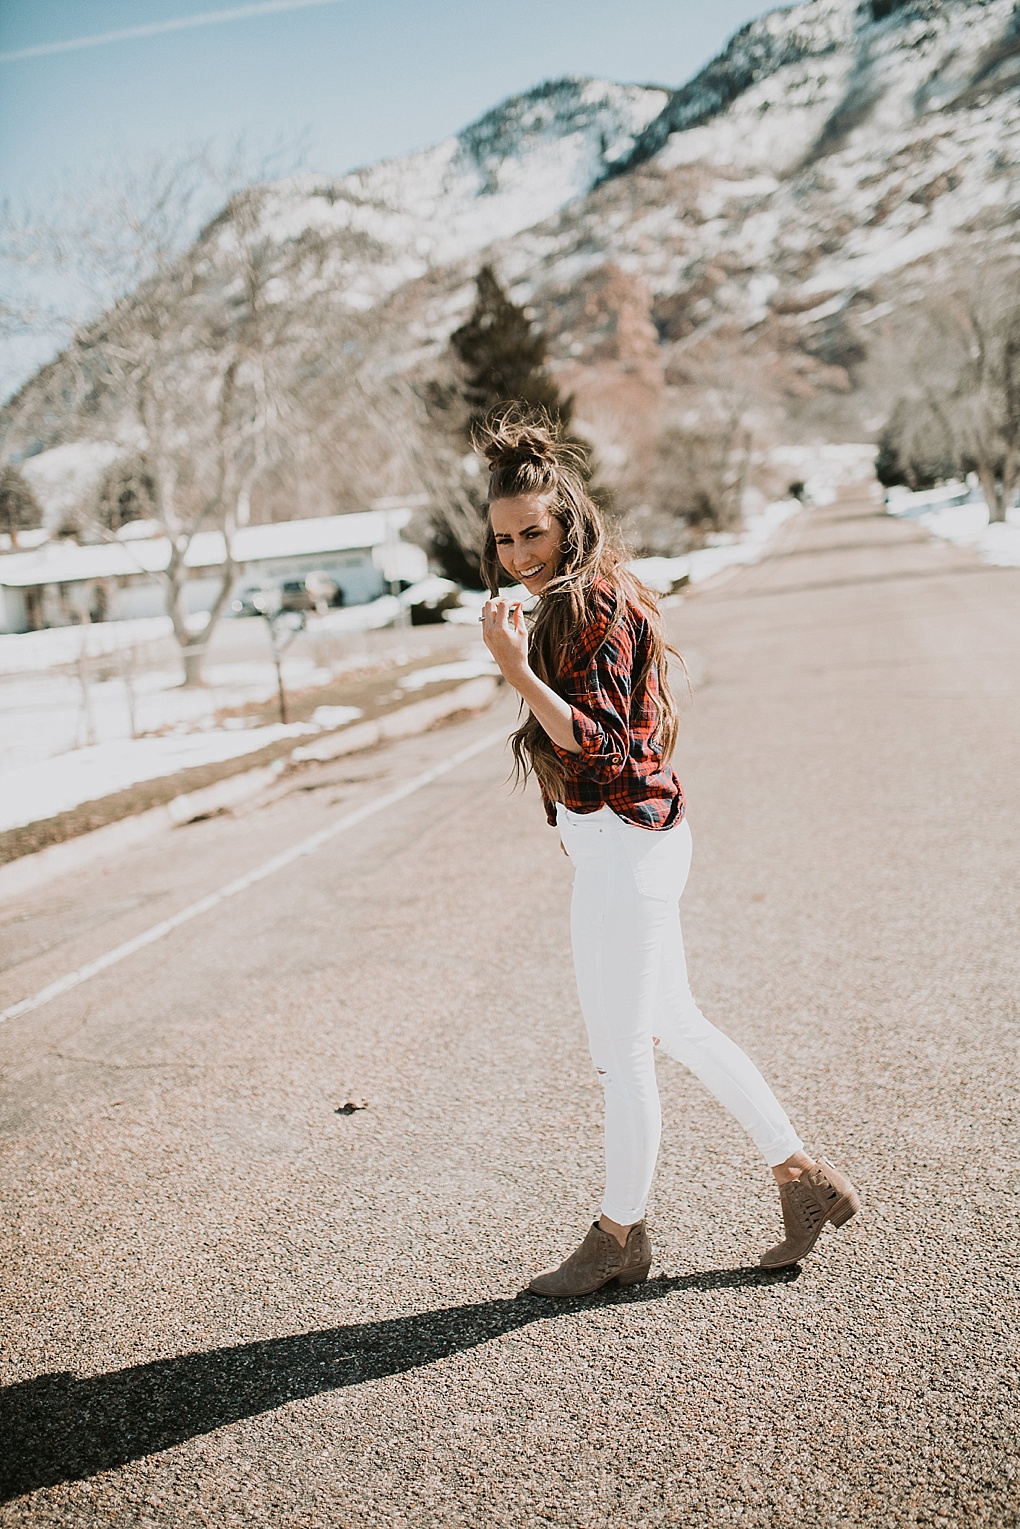 girl standing in road wearing flannel shirt with white jeans and hair loosely curled with half up top knot